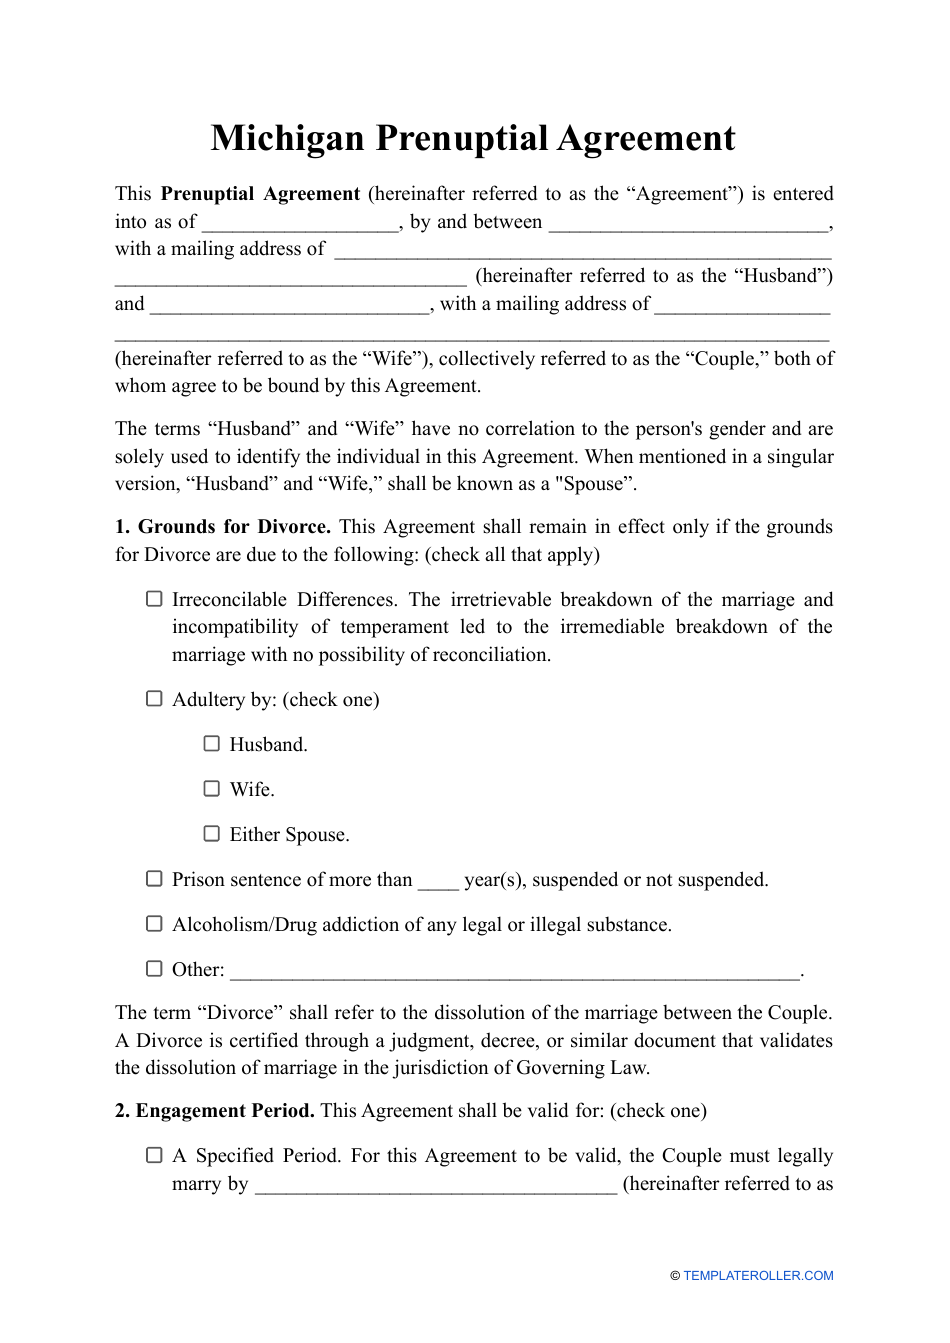 Michigan Prenuptial Agreement Template Fill Out, Sign Online and